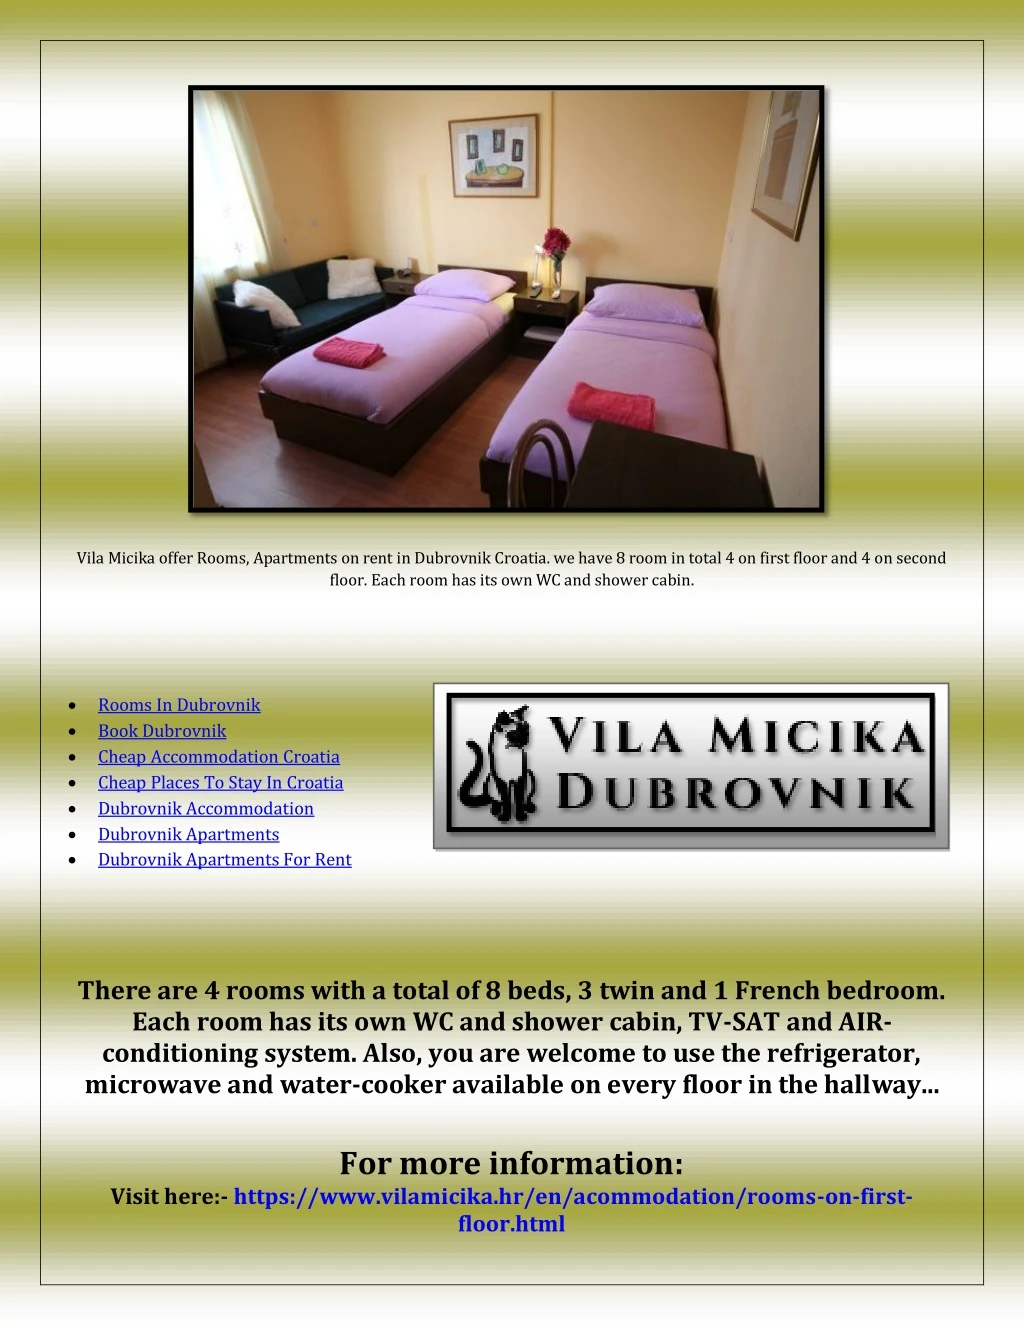 vila micika offer rooms apartments on rent